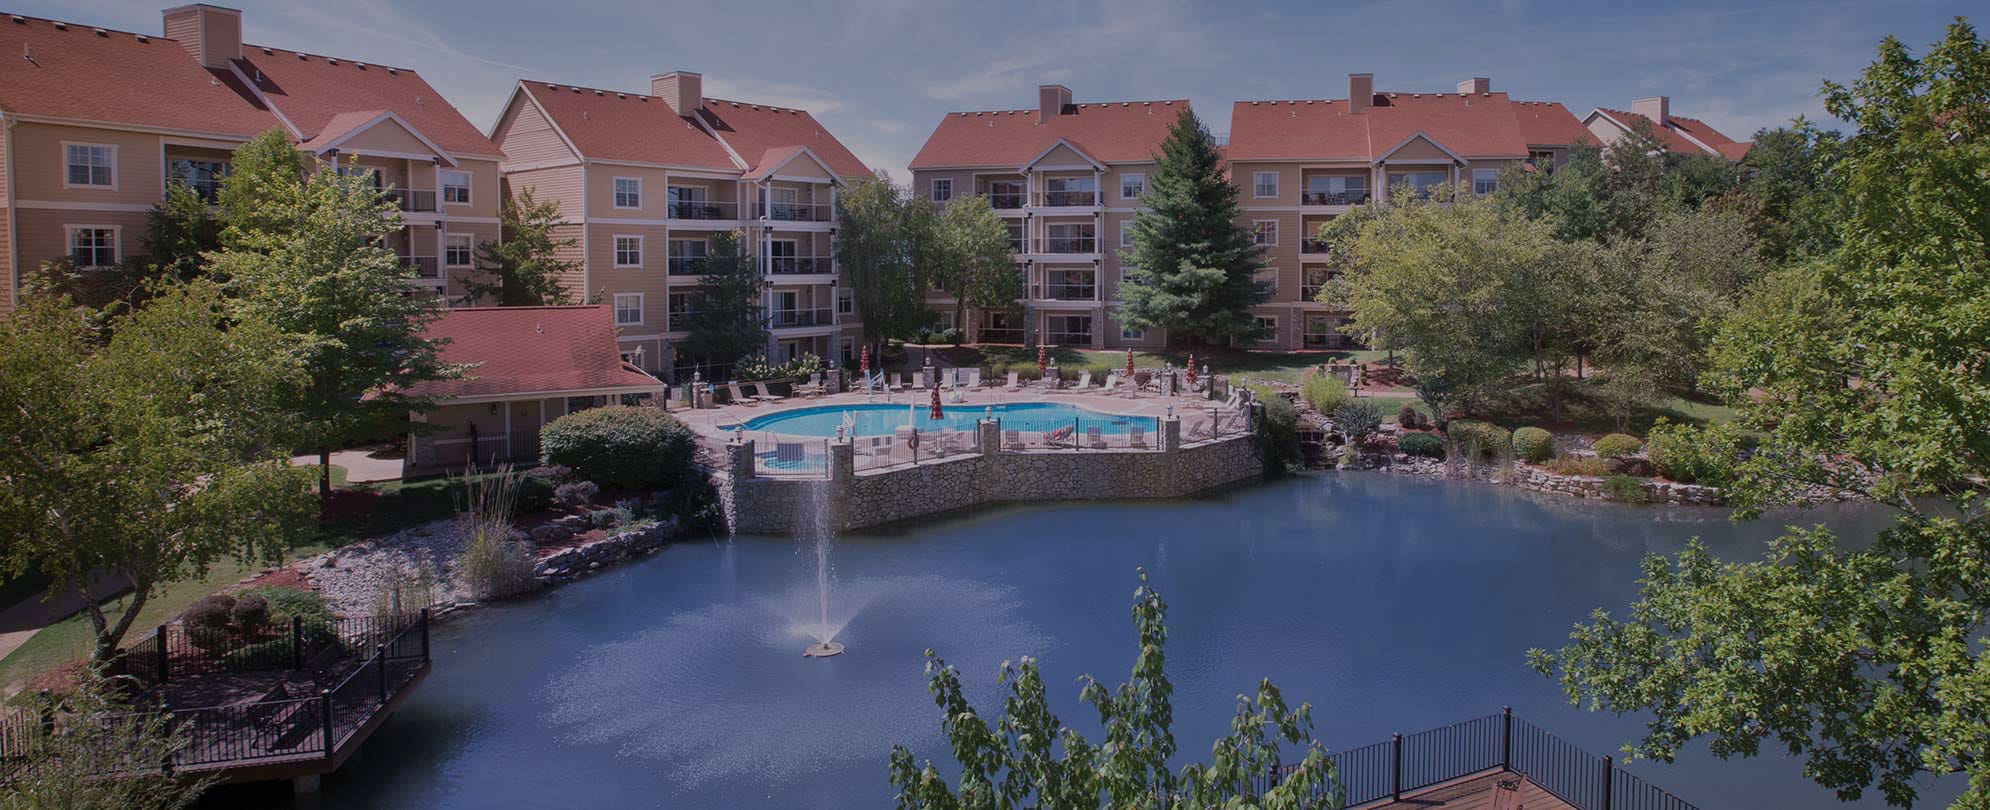 The exterior of Club Wyndham Branson at the Meadows overlooking an outdoor pool and a small lake with a fountain.